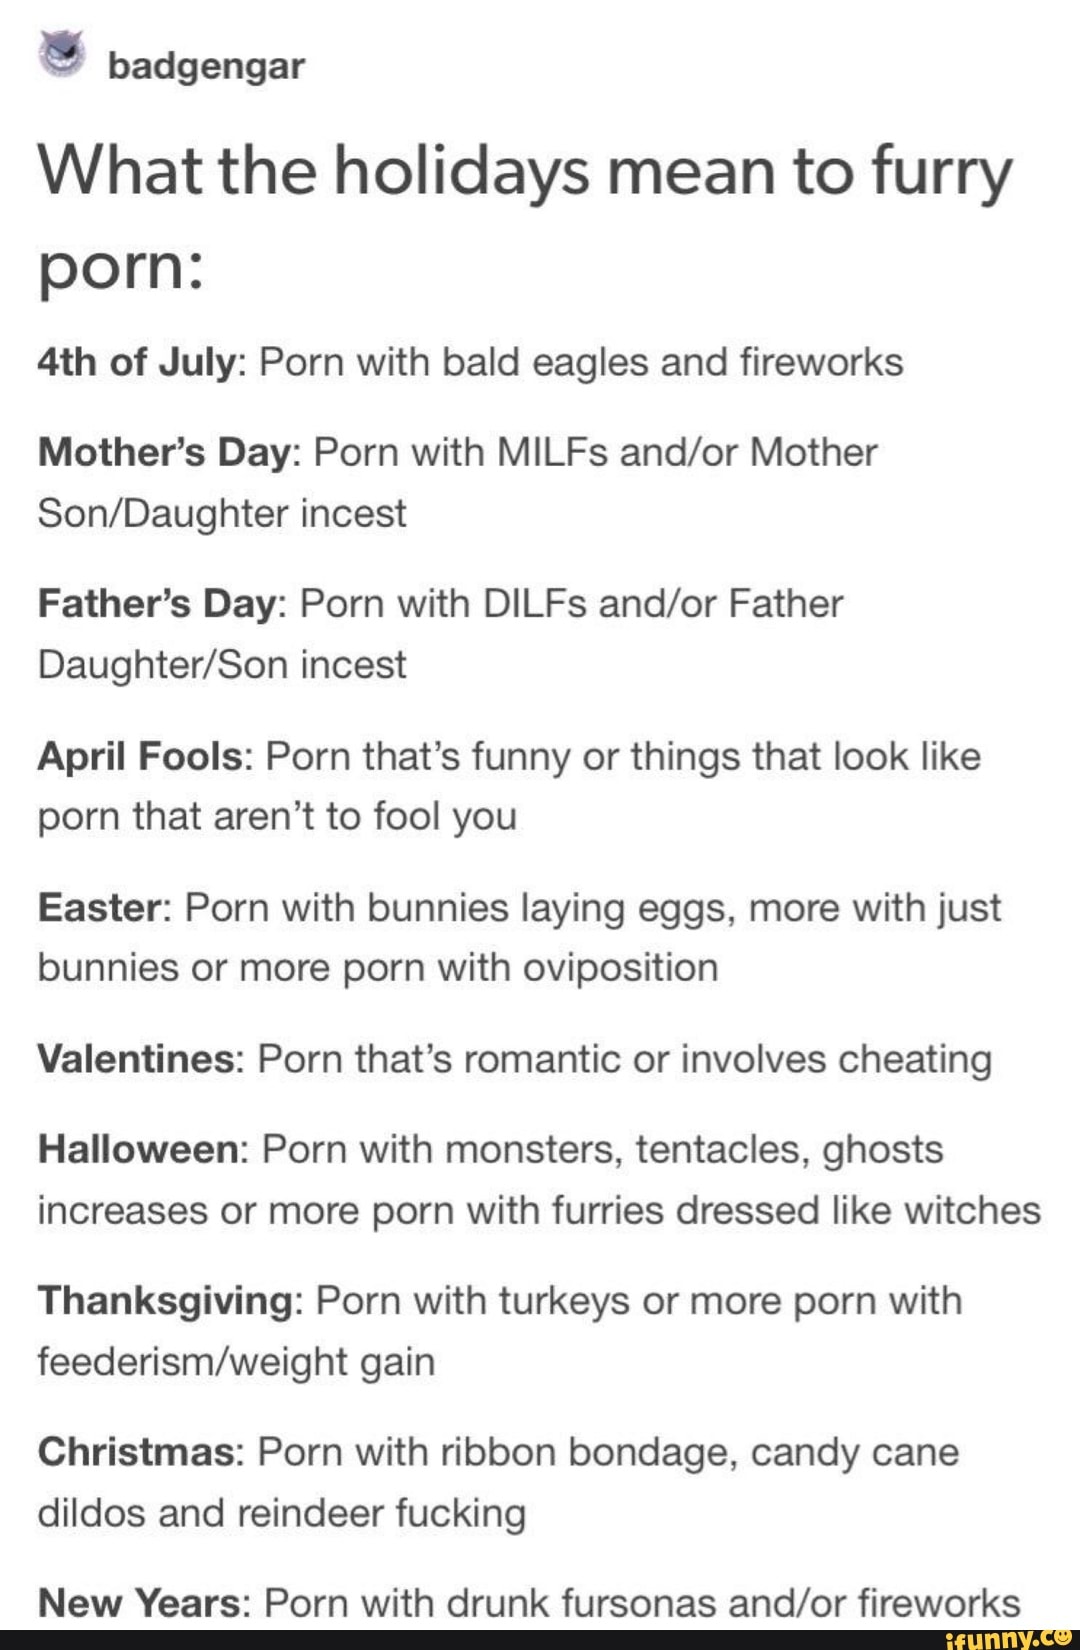 Furry Porn Holiday - Badgengar What the holidays mean to furry porn: 4th of July: Porn with bald  eagles and